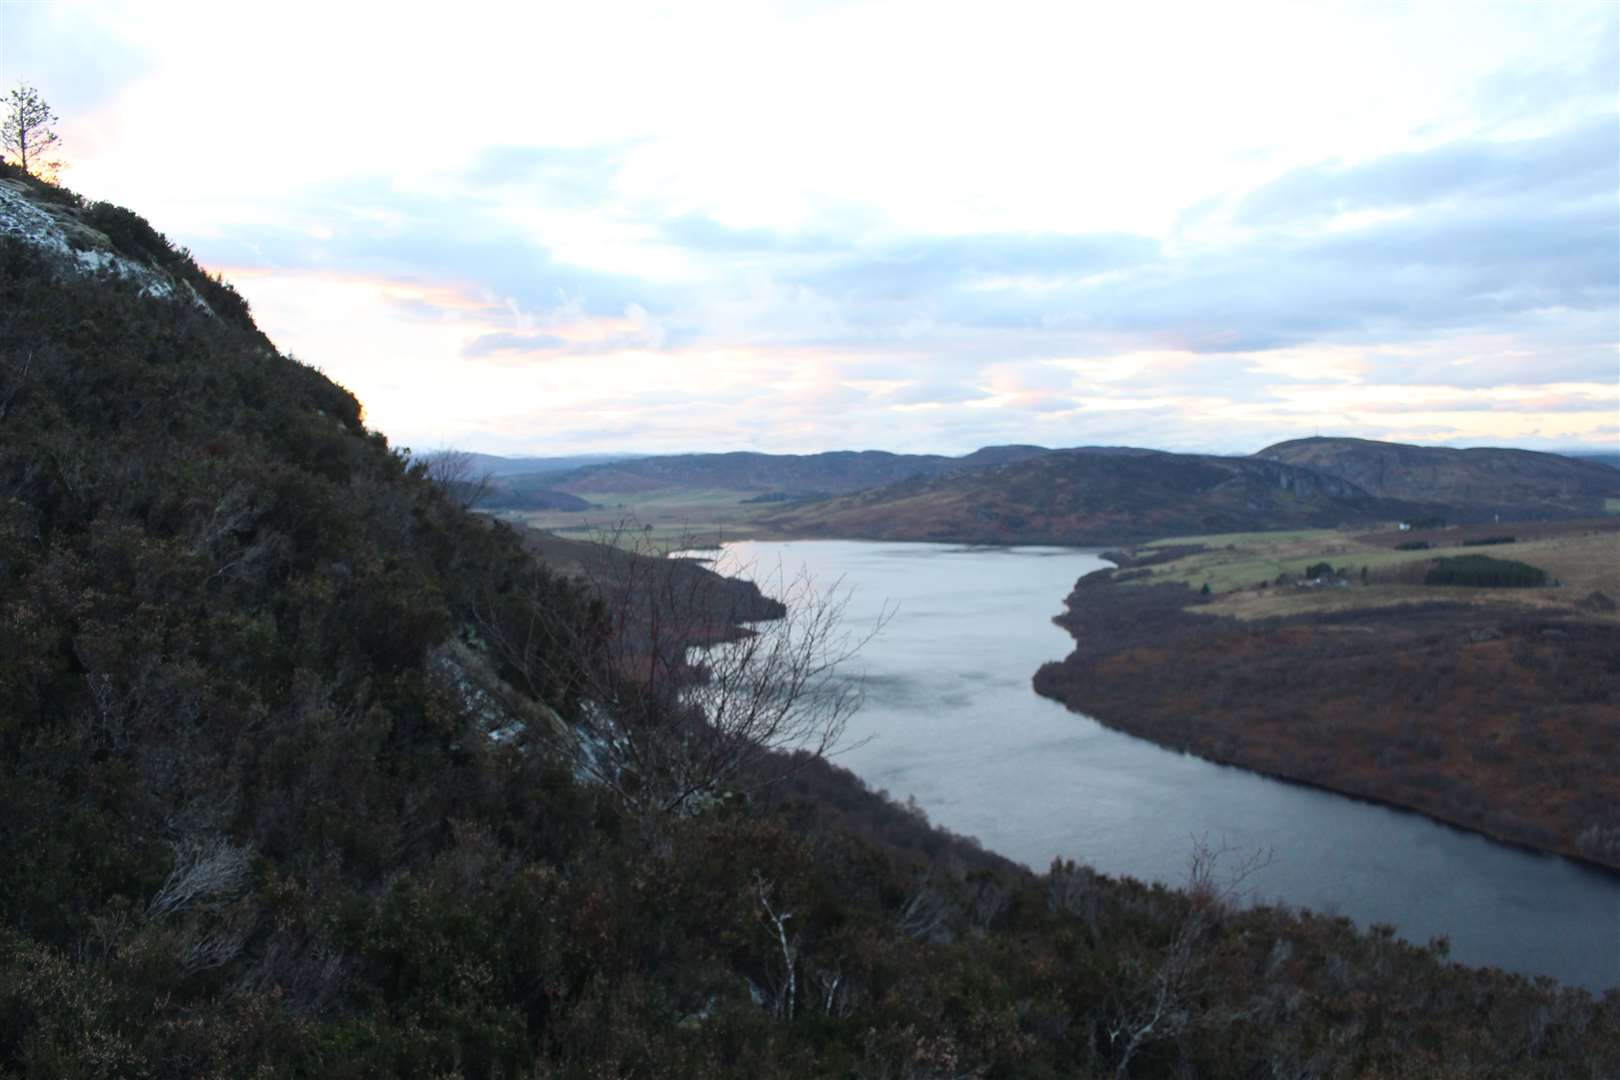 A view over Loch Ruthven.